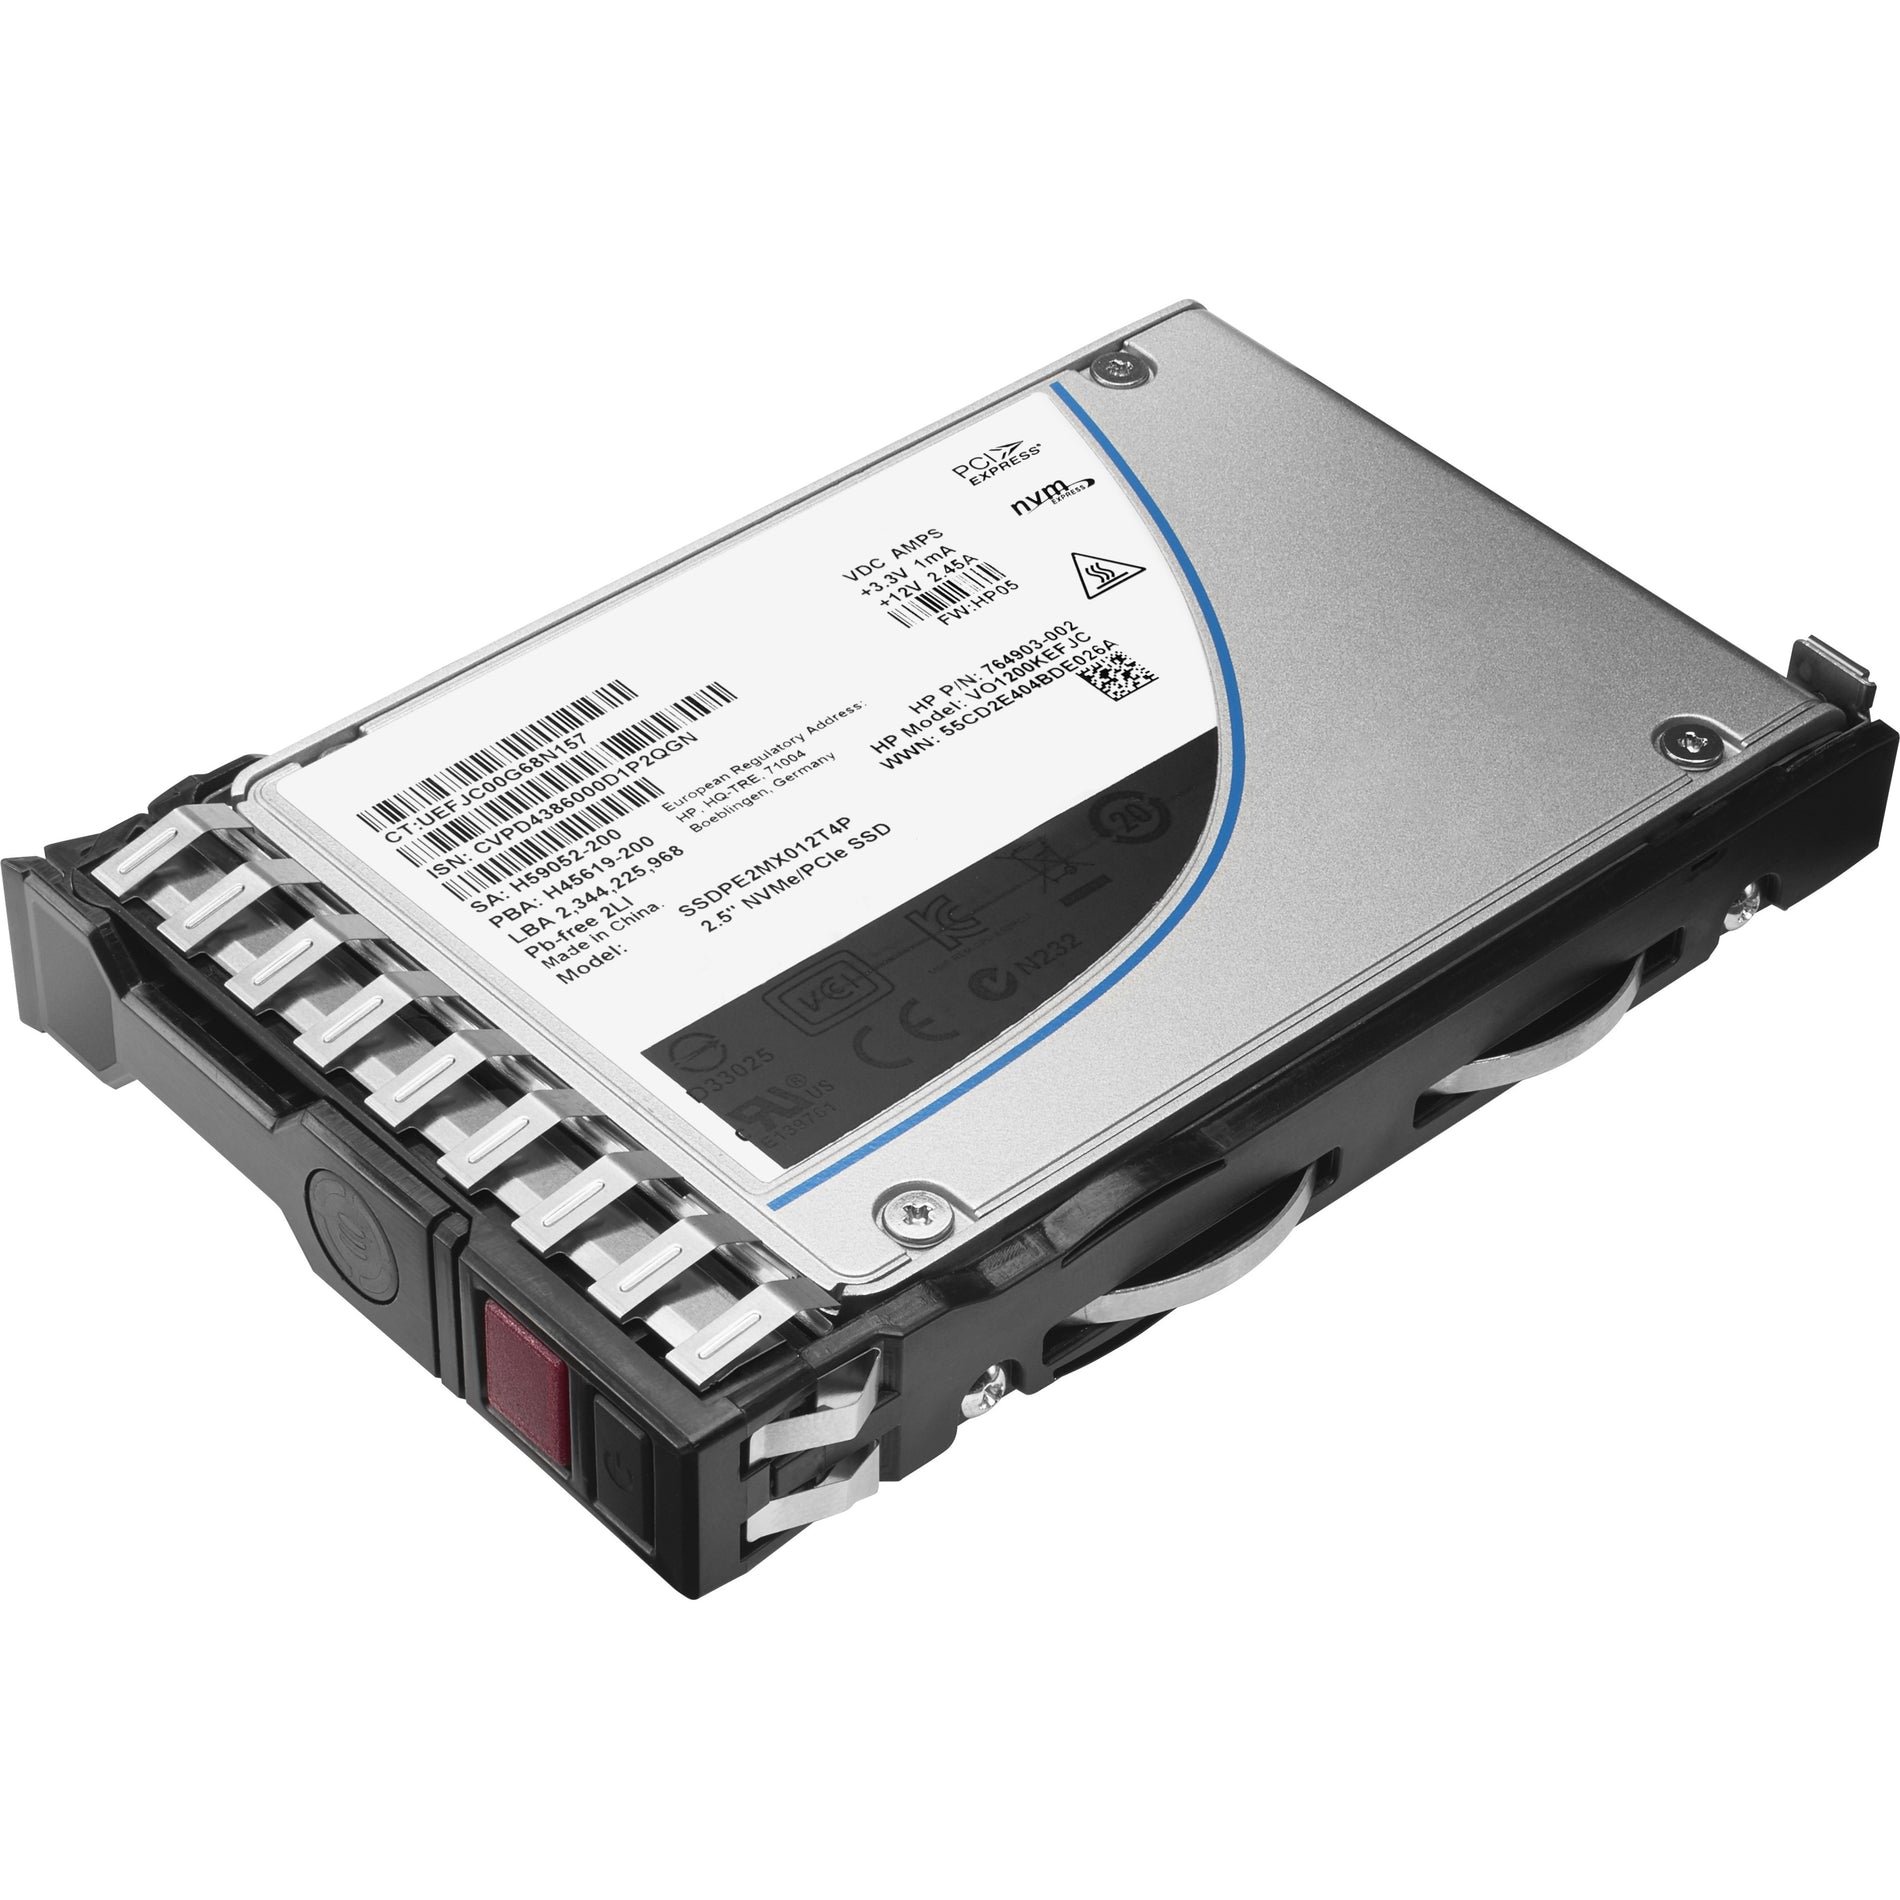 HPE 875478-B21 Solid State Drive with SMART Carrier, 1.92 TB SATA/600 Internal